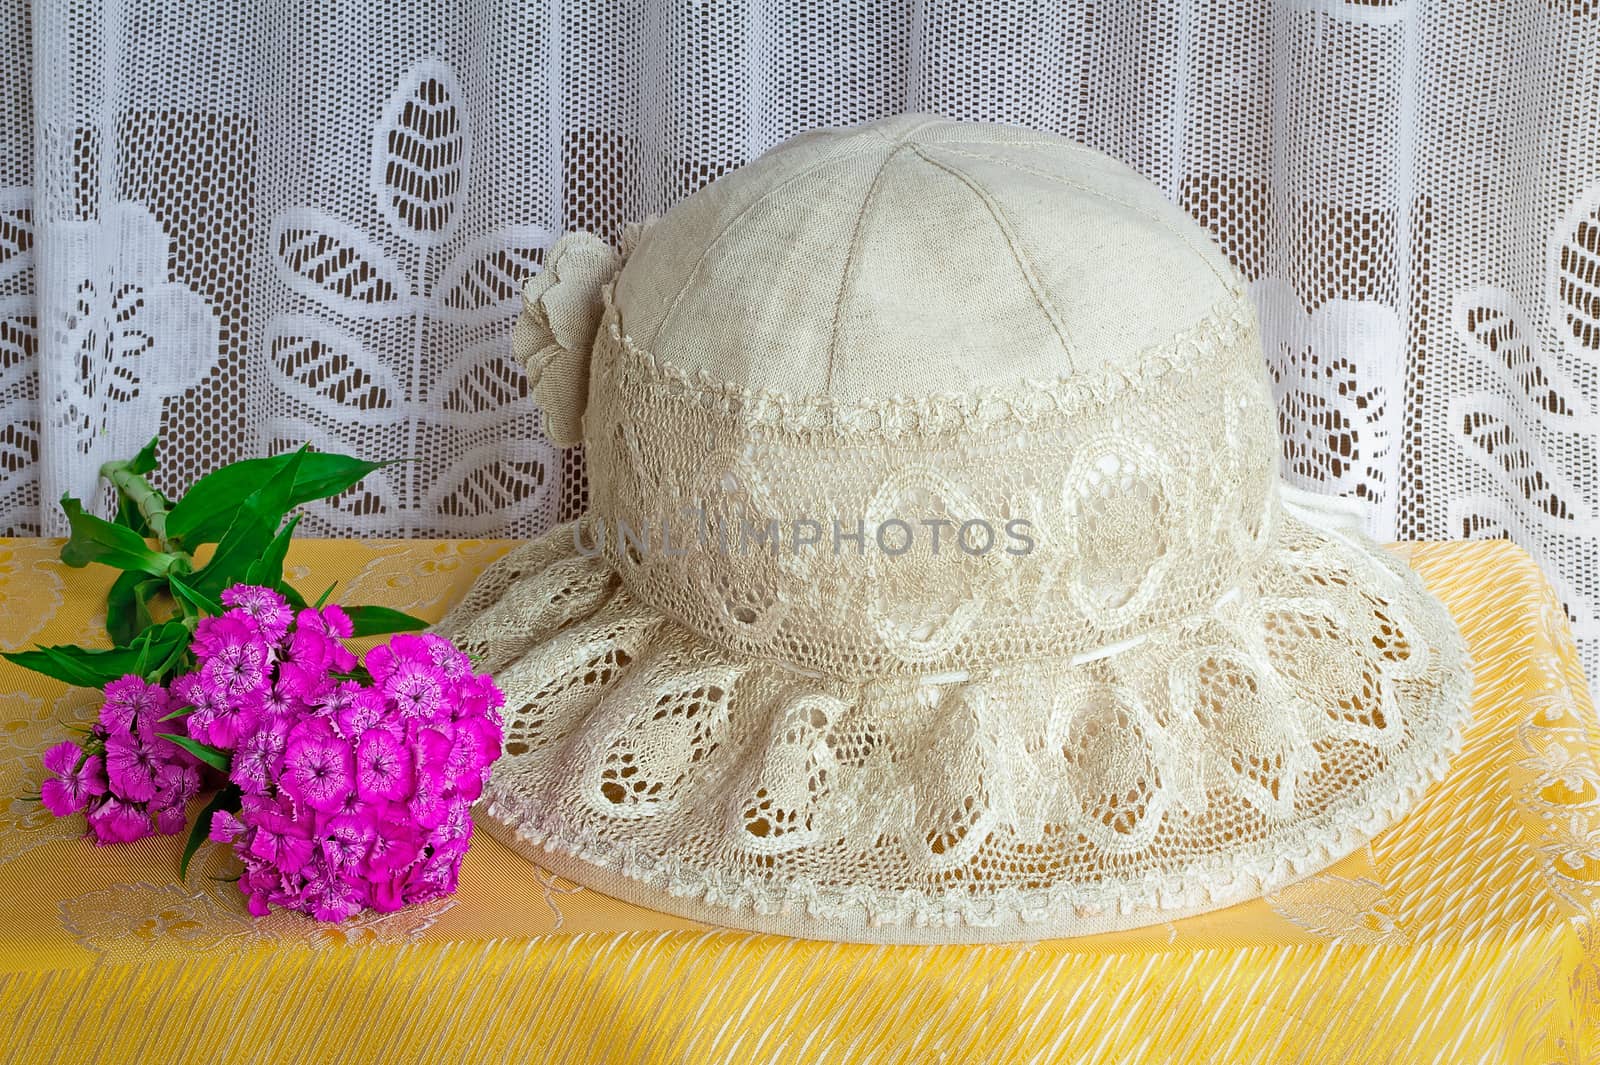 Female summer hat for protection against the sun during summer h by georgina198